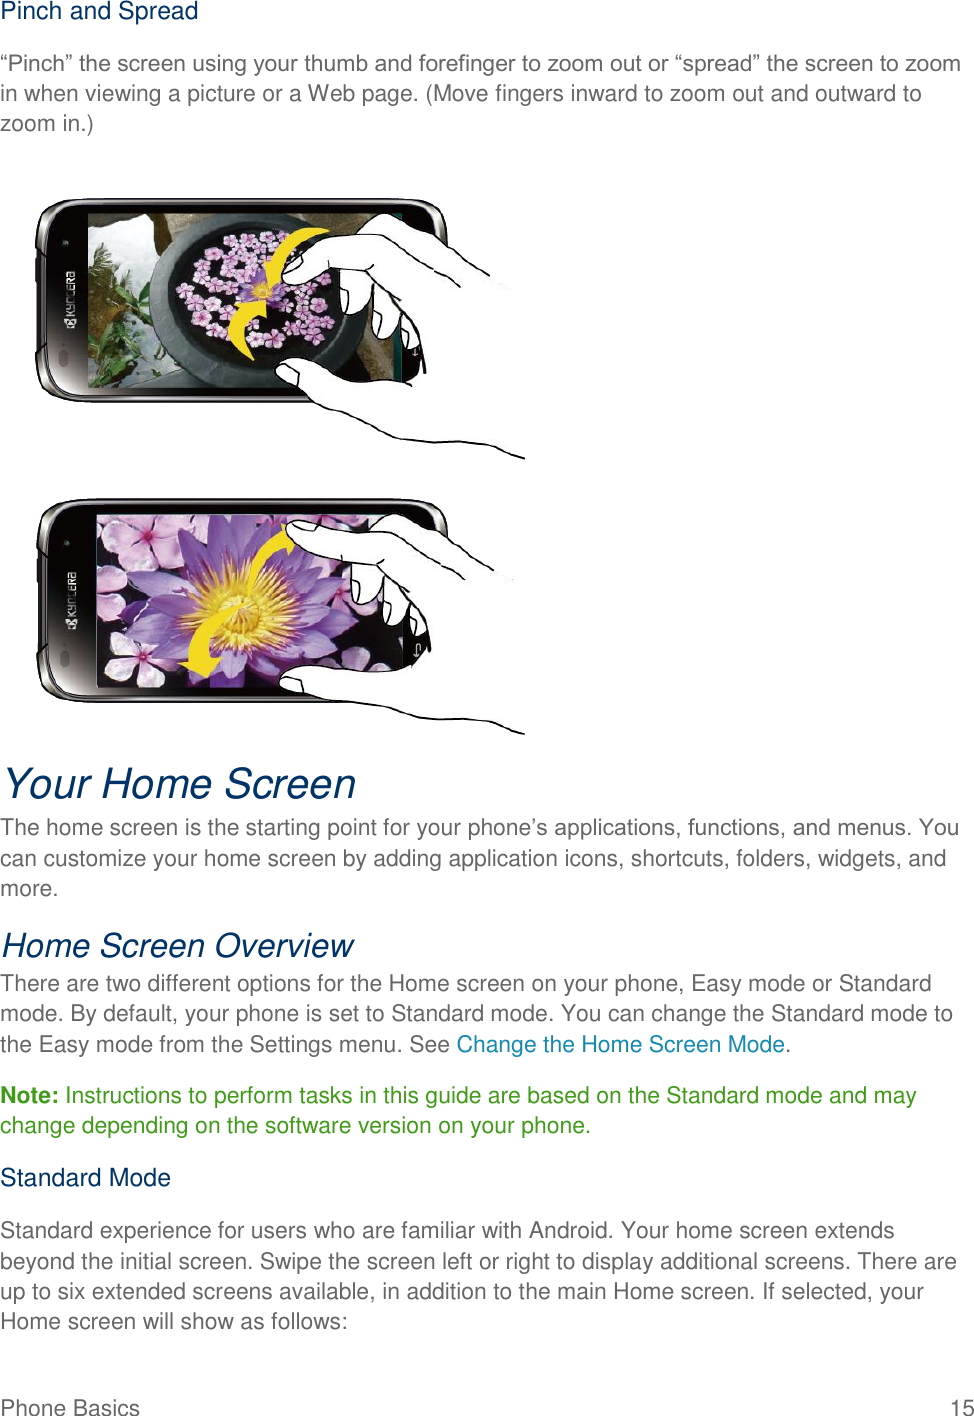 Phone Basics  15 Pinch and Spread “Pinch” the screen using your thumb and forefinger to zoom out or “spread” the screen to zoom in when viewing a picture or a Web page. (Move fingers inward to zoom out and outward to zoom in.)   Your Home Screen The home screen is the starting point for your phone’s applications, functions, and menus. You can customize your home screen by adding application icons, shortcuts, folders, widgets, and more.  Home Screen Overview  There are two different options for the Home screen on your phone, Easy mode or Standard mode. By default, your phone is set to Standard mode. You can change the Standard mode to the Easy mode from the Settings menu. See Change the Home Screen Mode. Note: Instructions to perform tasks in this guide are based on the Standard mode and may change depending on the software version on your phone.   Standard Mode Standard experience for users who are familiar with Android. Your home screen extends beyond the initial screen. Swipe the screen left or right to display additional screens. There are up to six extended screens available, in addition to the main Home screen. If selected, your Home screen will show as follows:  